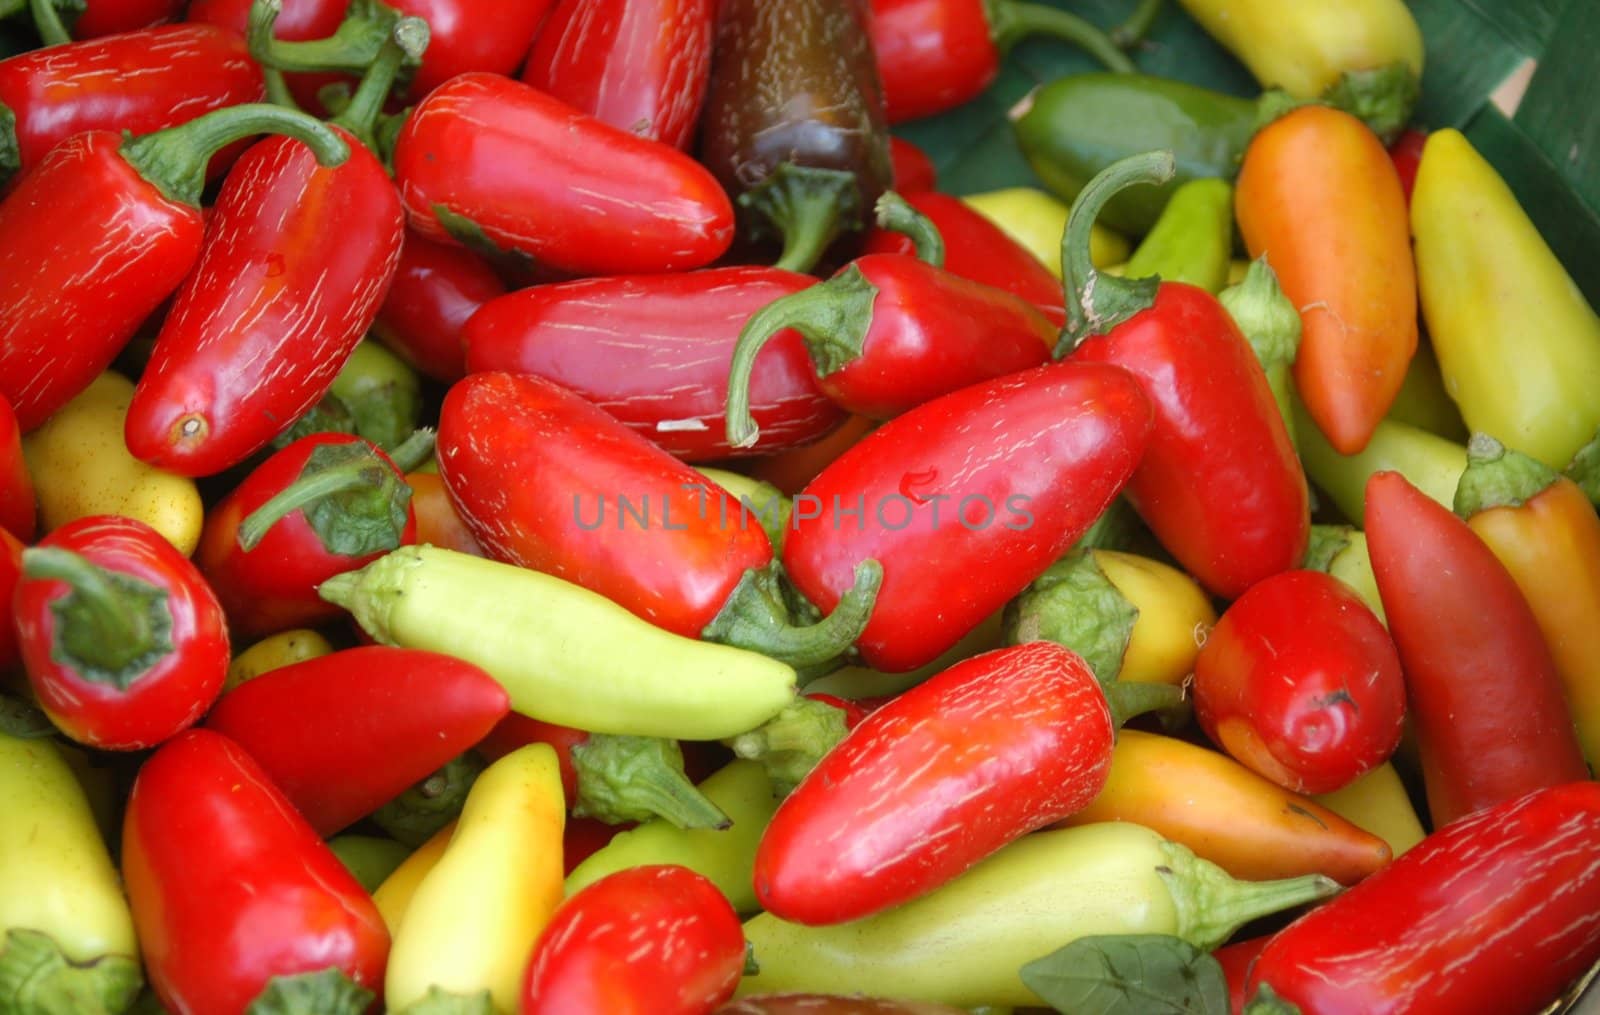 A closeup view of peppers in a basket ready for cooking